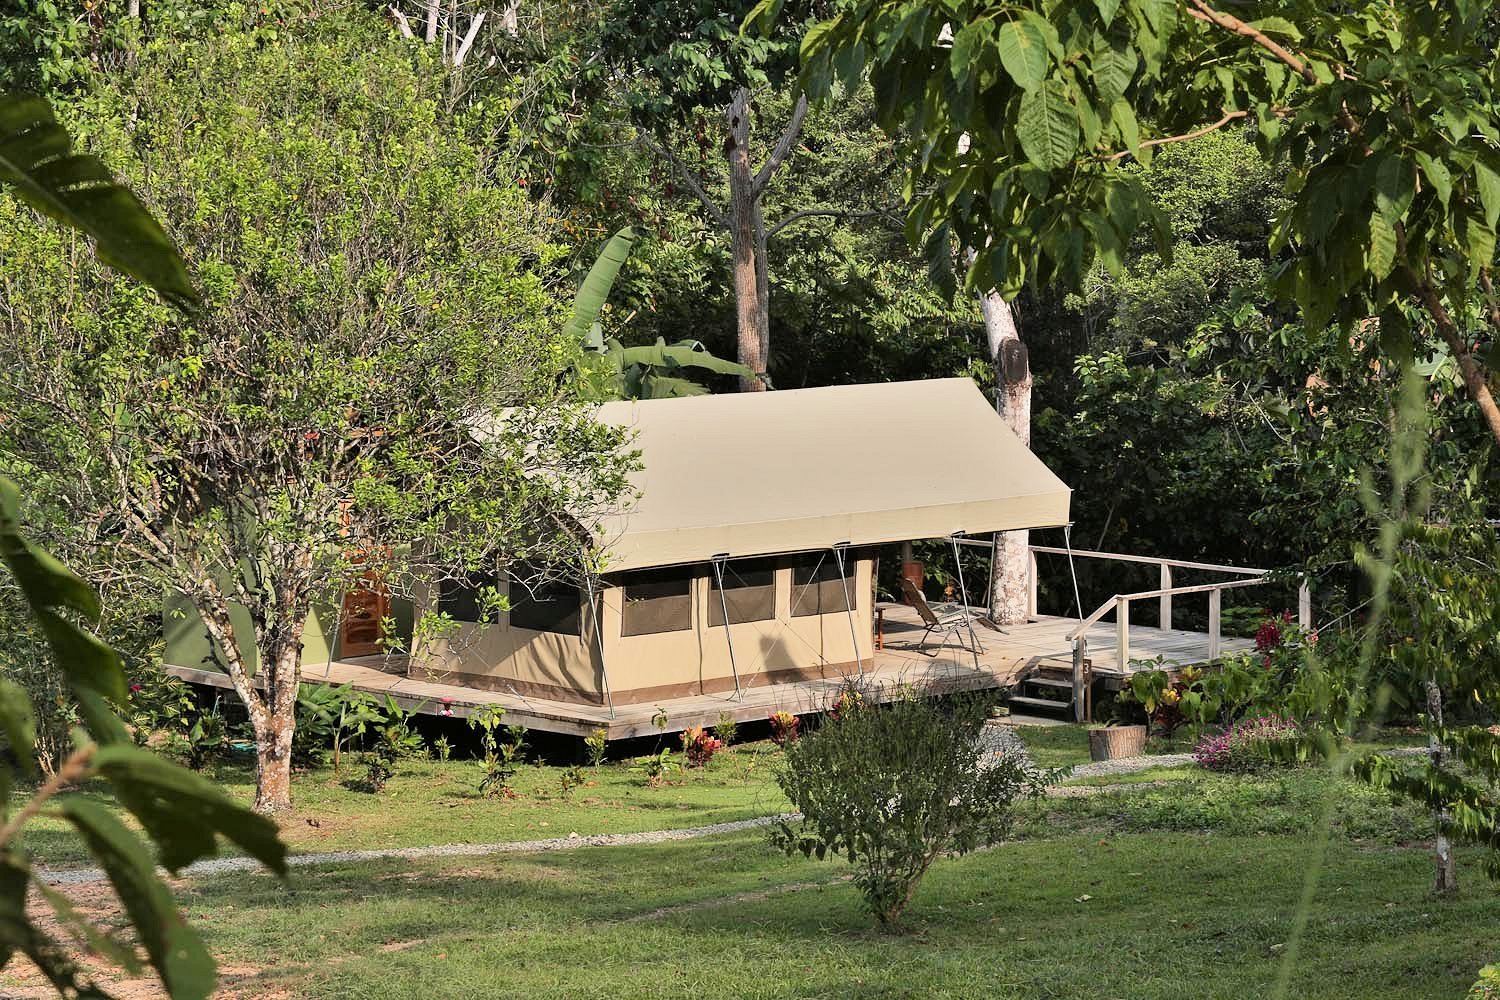 Luxury safari-style tents with private observation decks!  